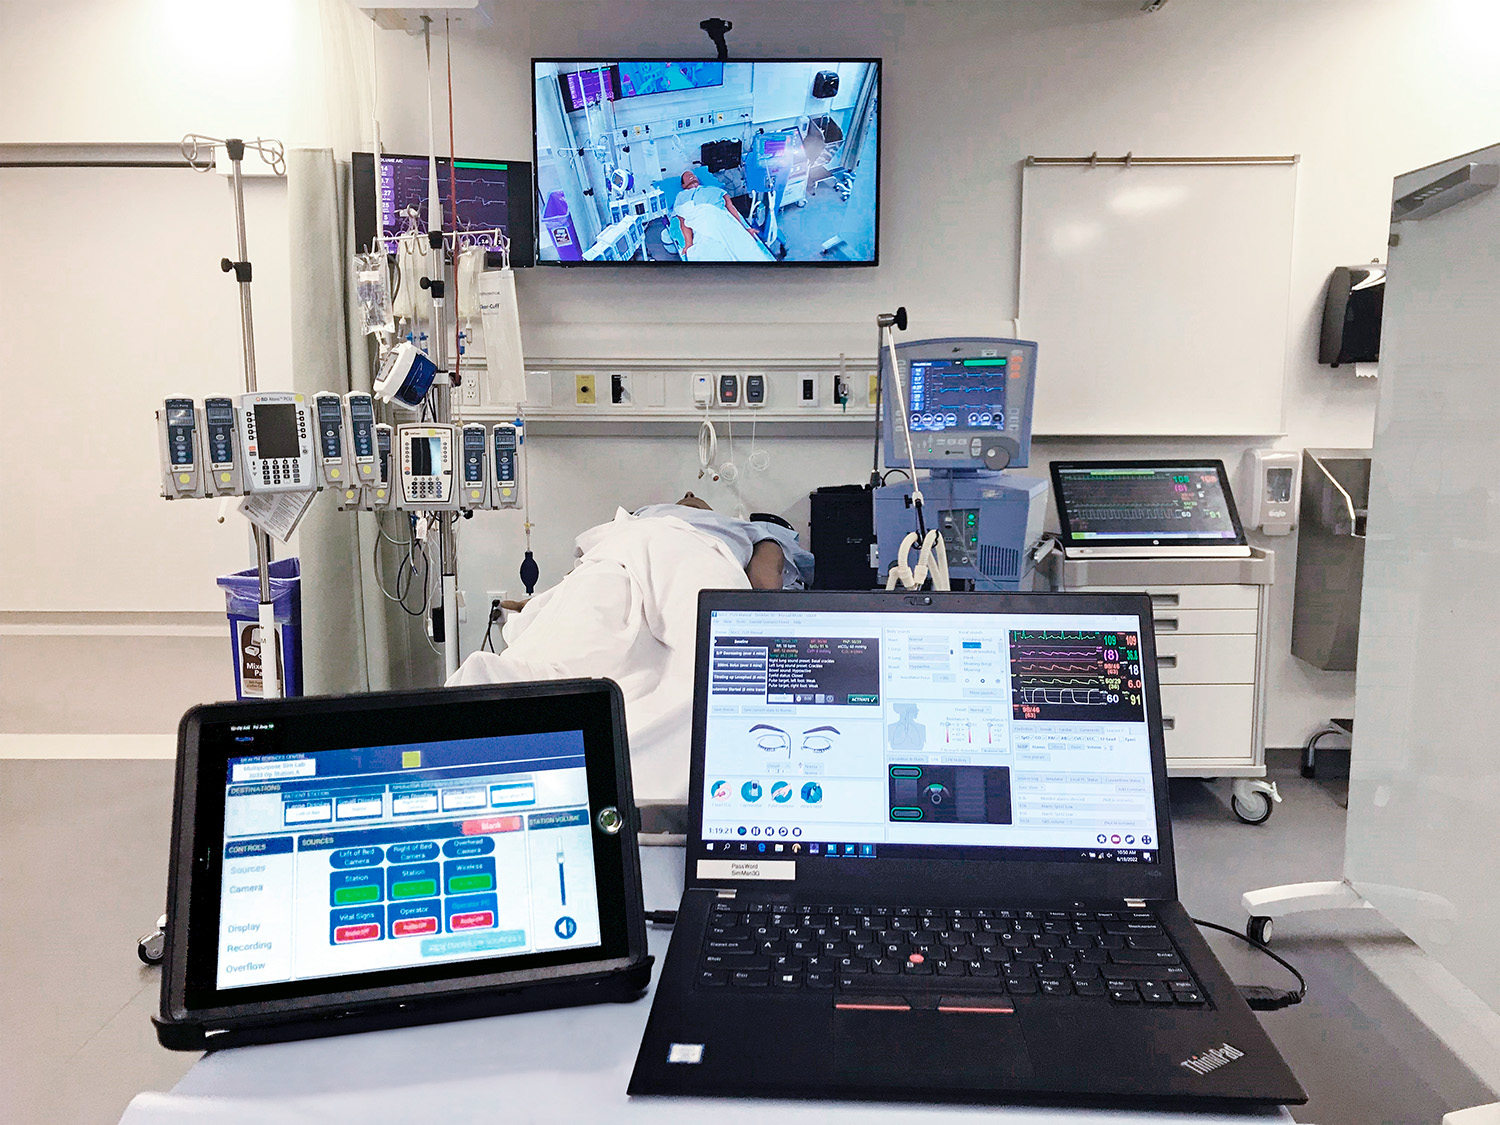 The various bed station systems can be monitored and operated from a workstation within the associated control room.